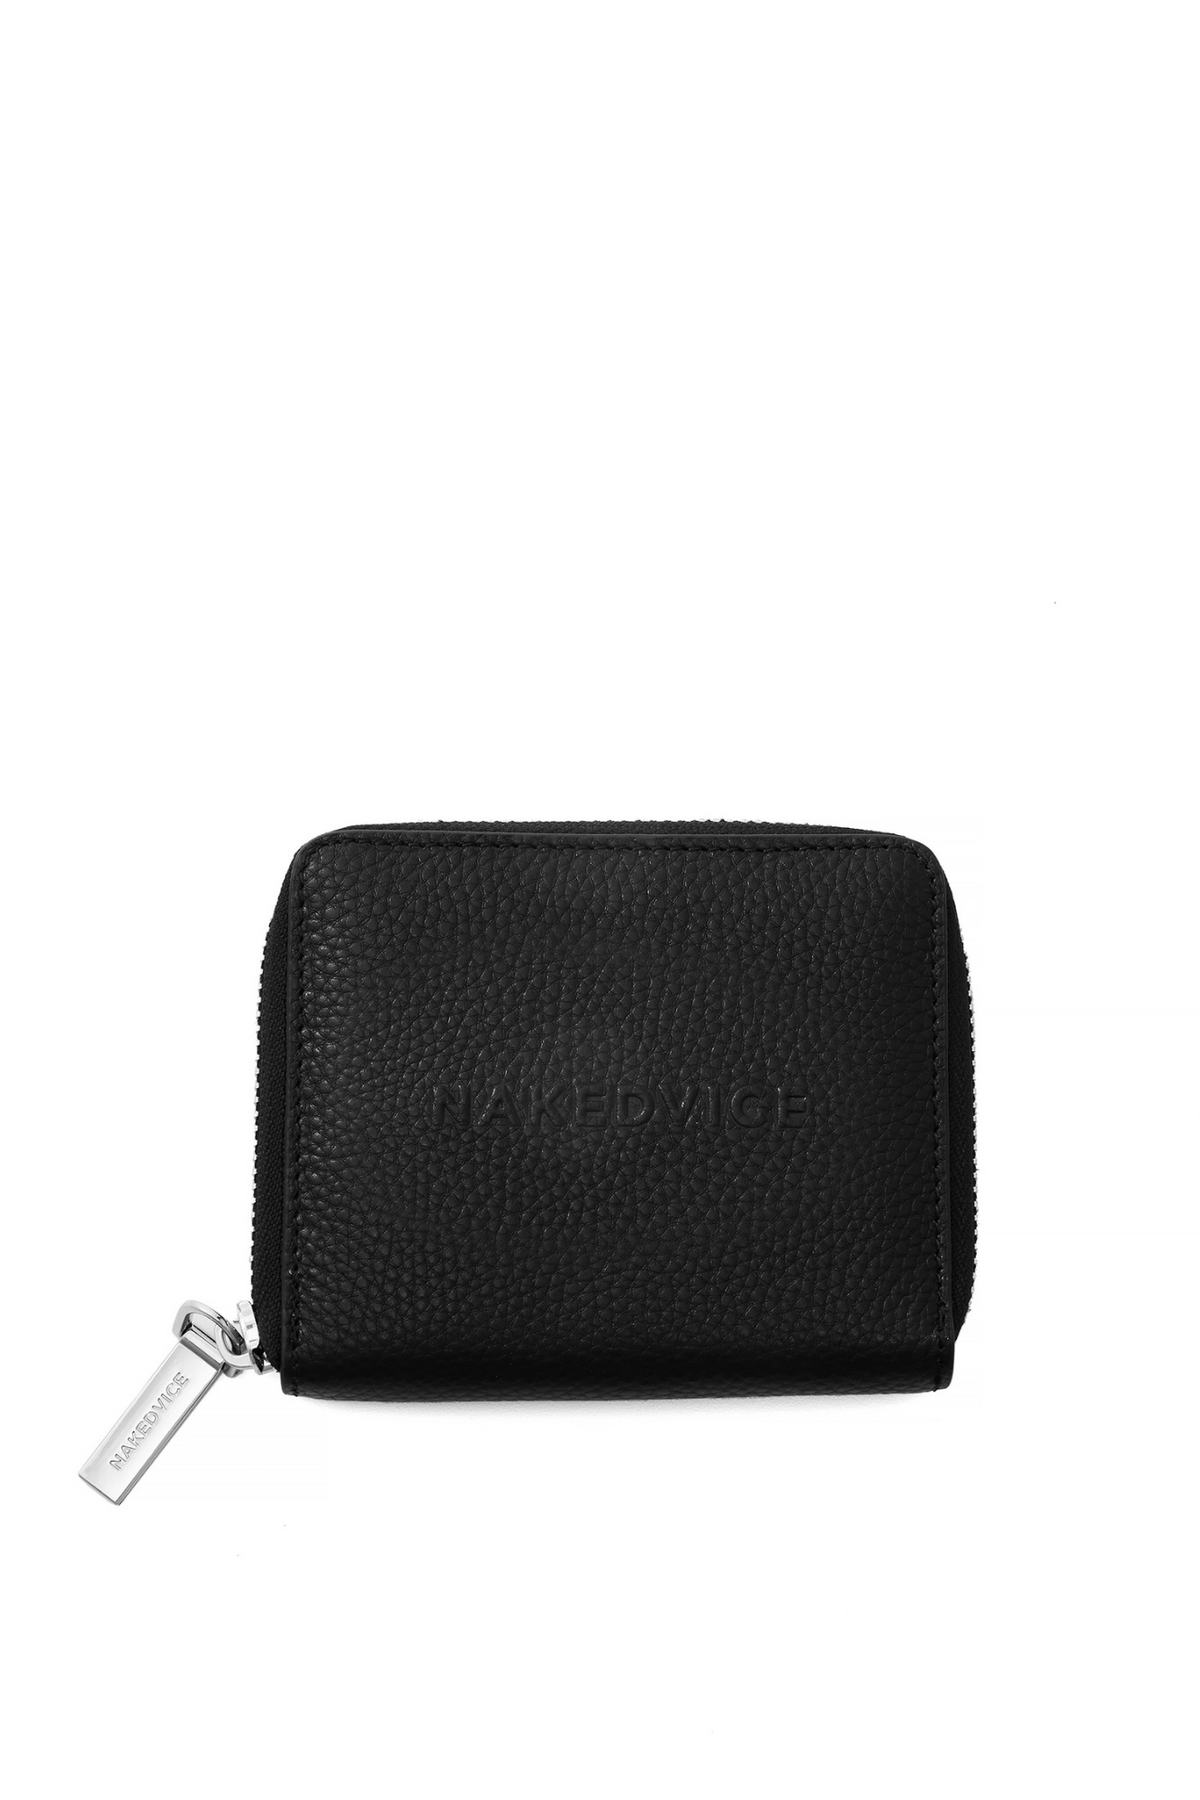 THE THEO WALLET - SILVER